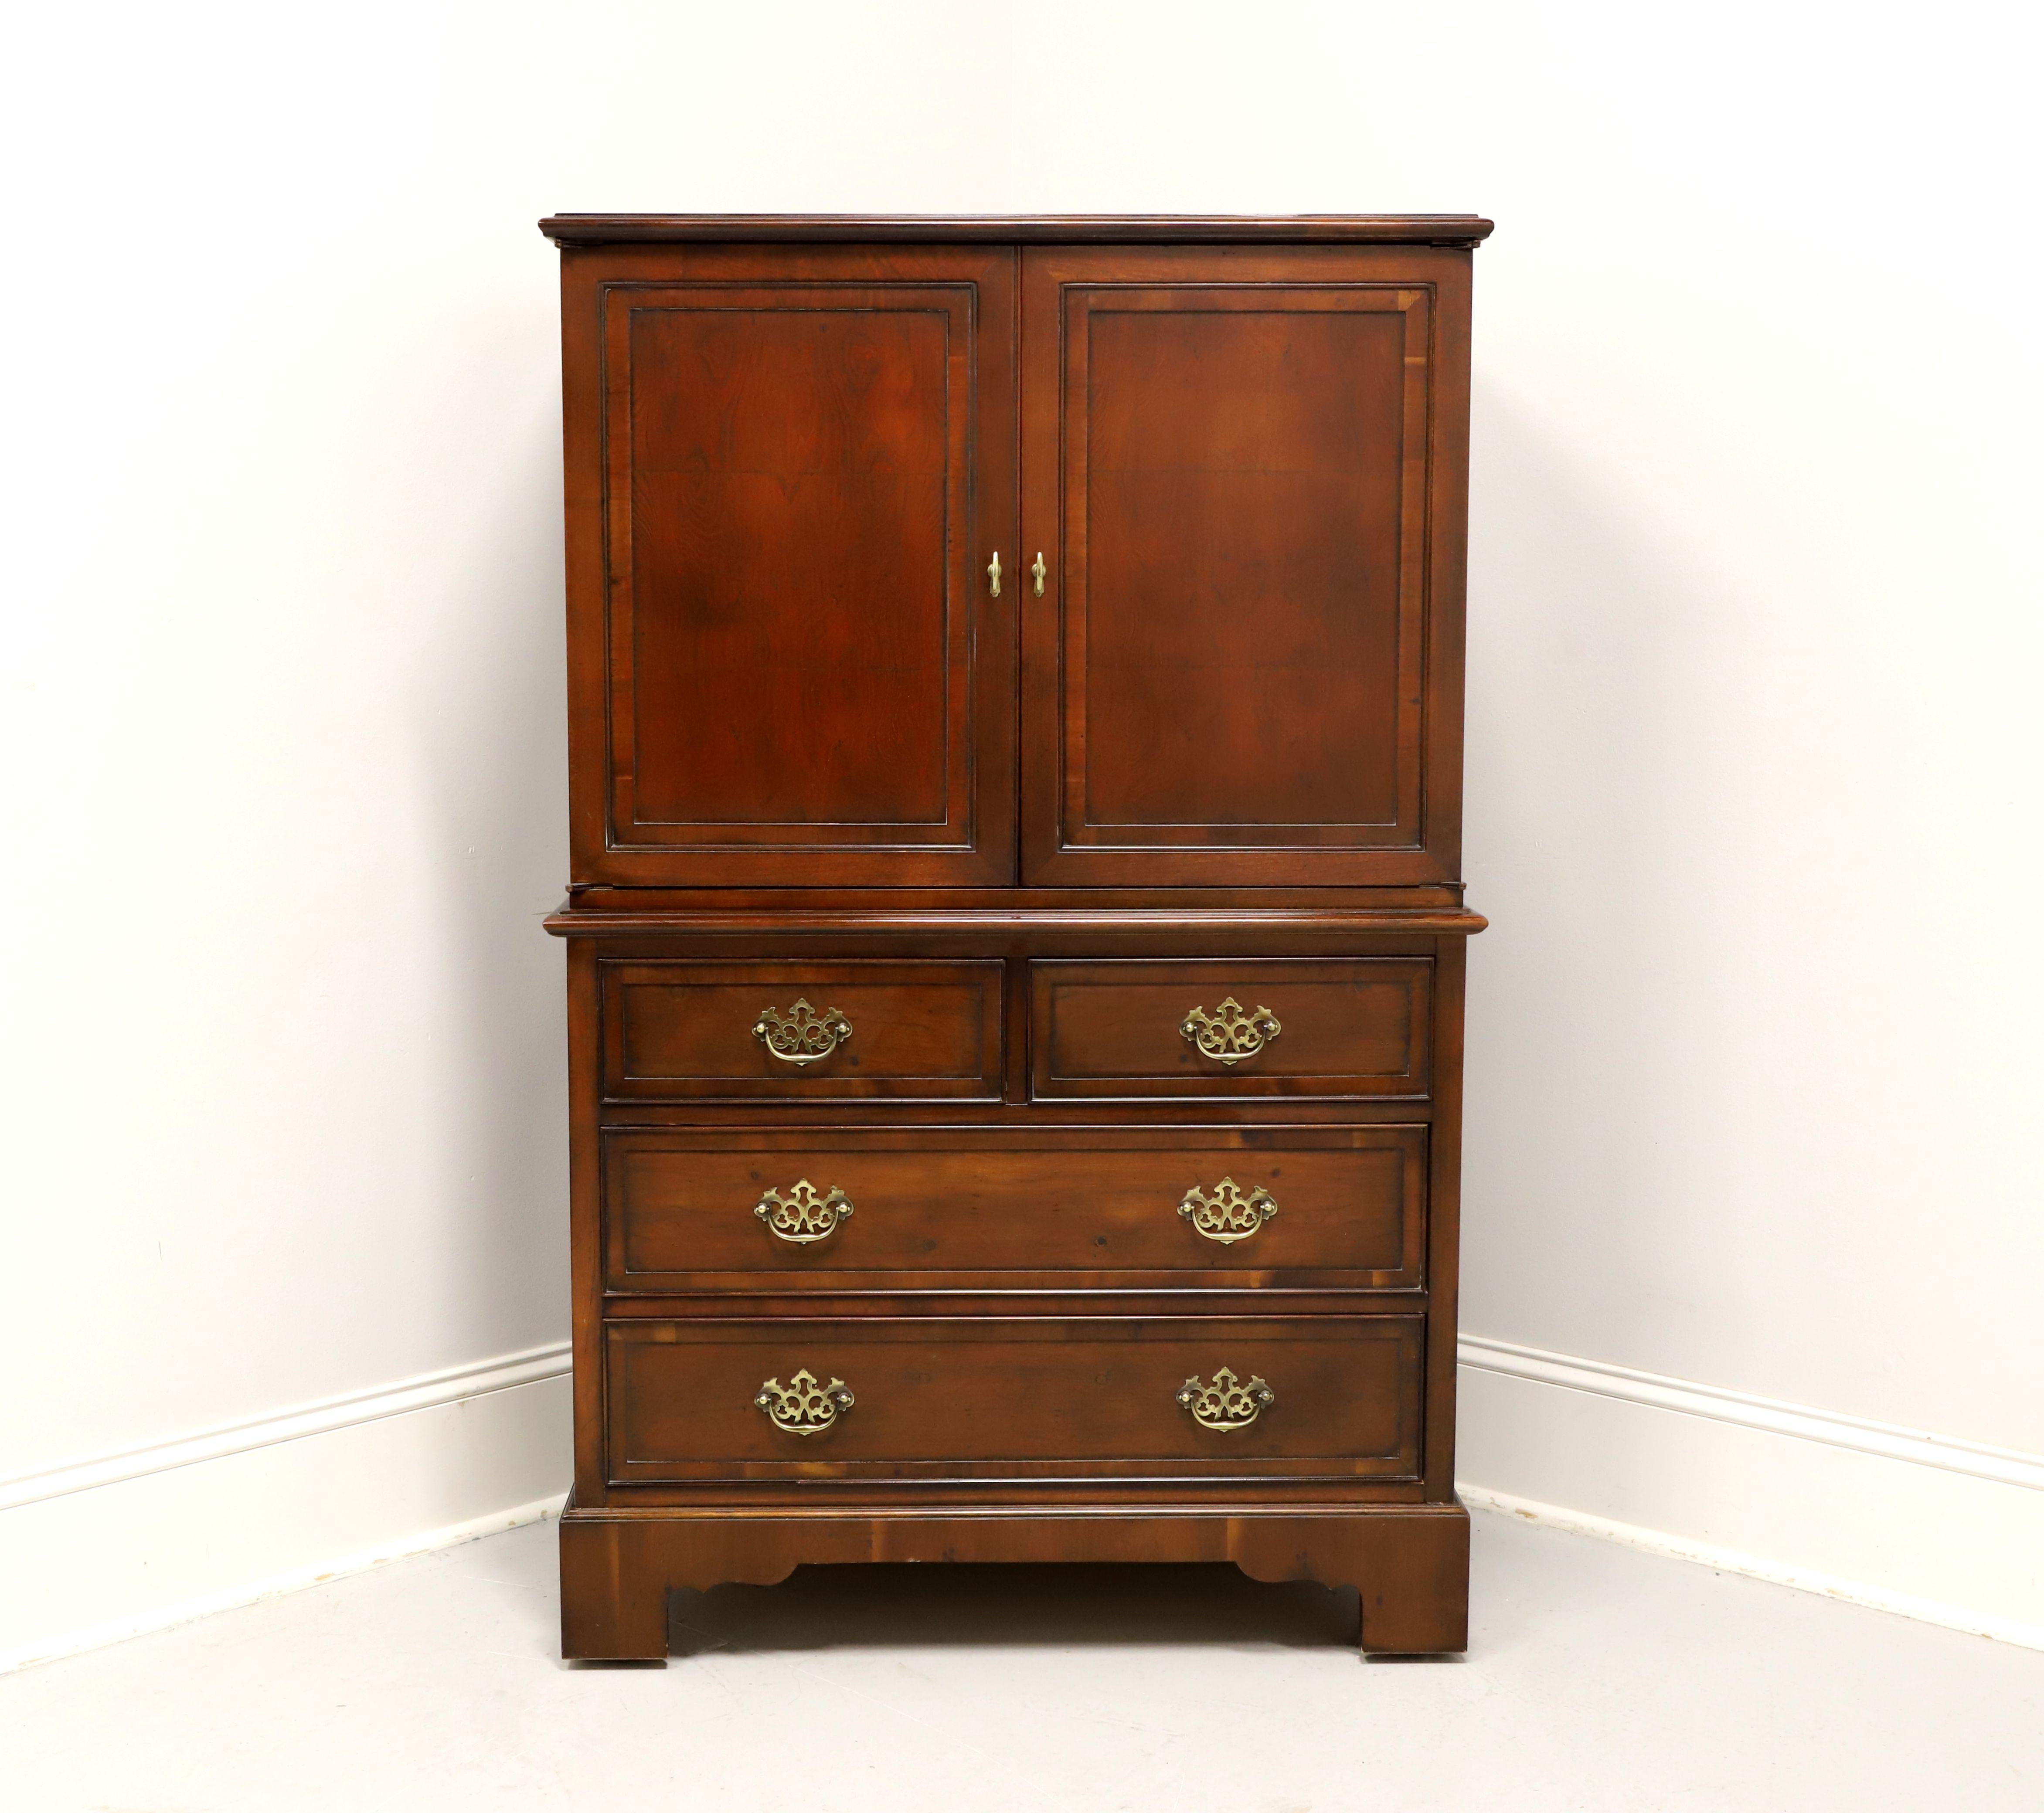 A Chippendale style entertainment cabinet chest by Hekman. Inlaid yew wood with brass hardware, ogee edge to top, ogee edge at middle to separate cabinet from chest, and bracket feet. Features upper cabinet with two fold back doors above two smaller